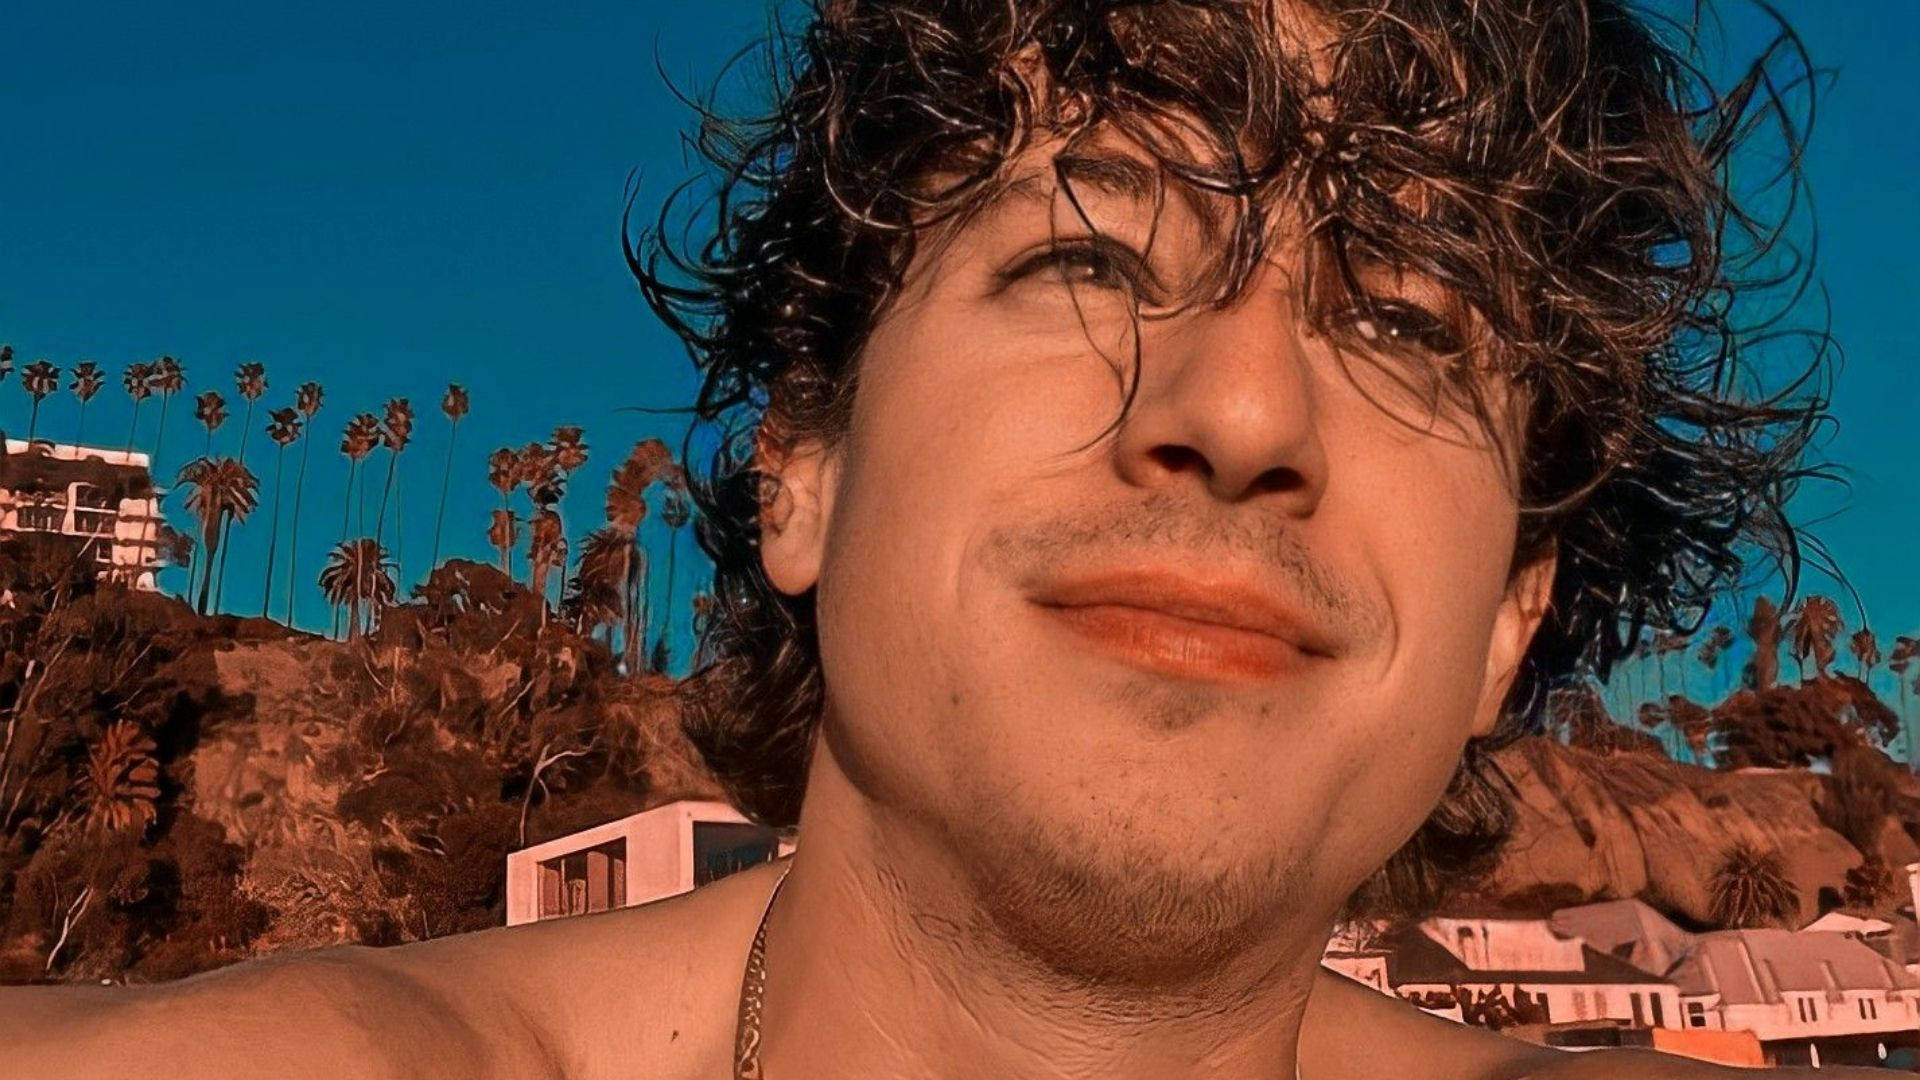 Charlie Puth On The Beach Background